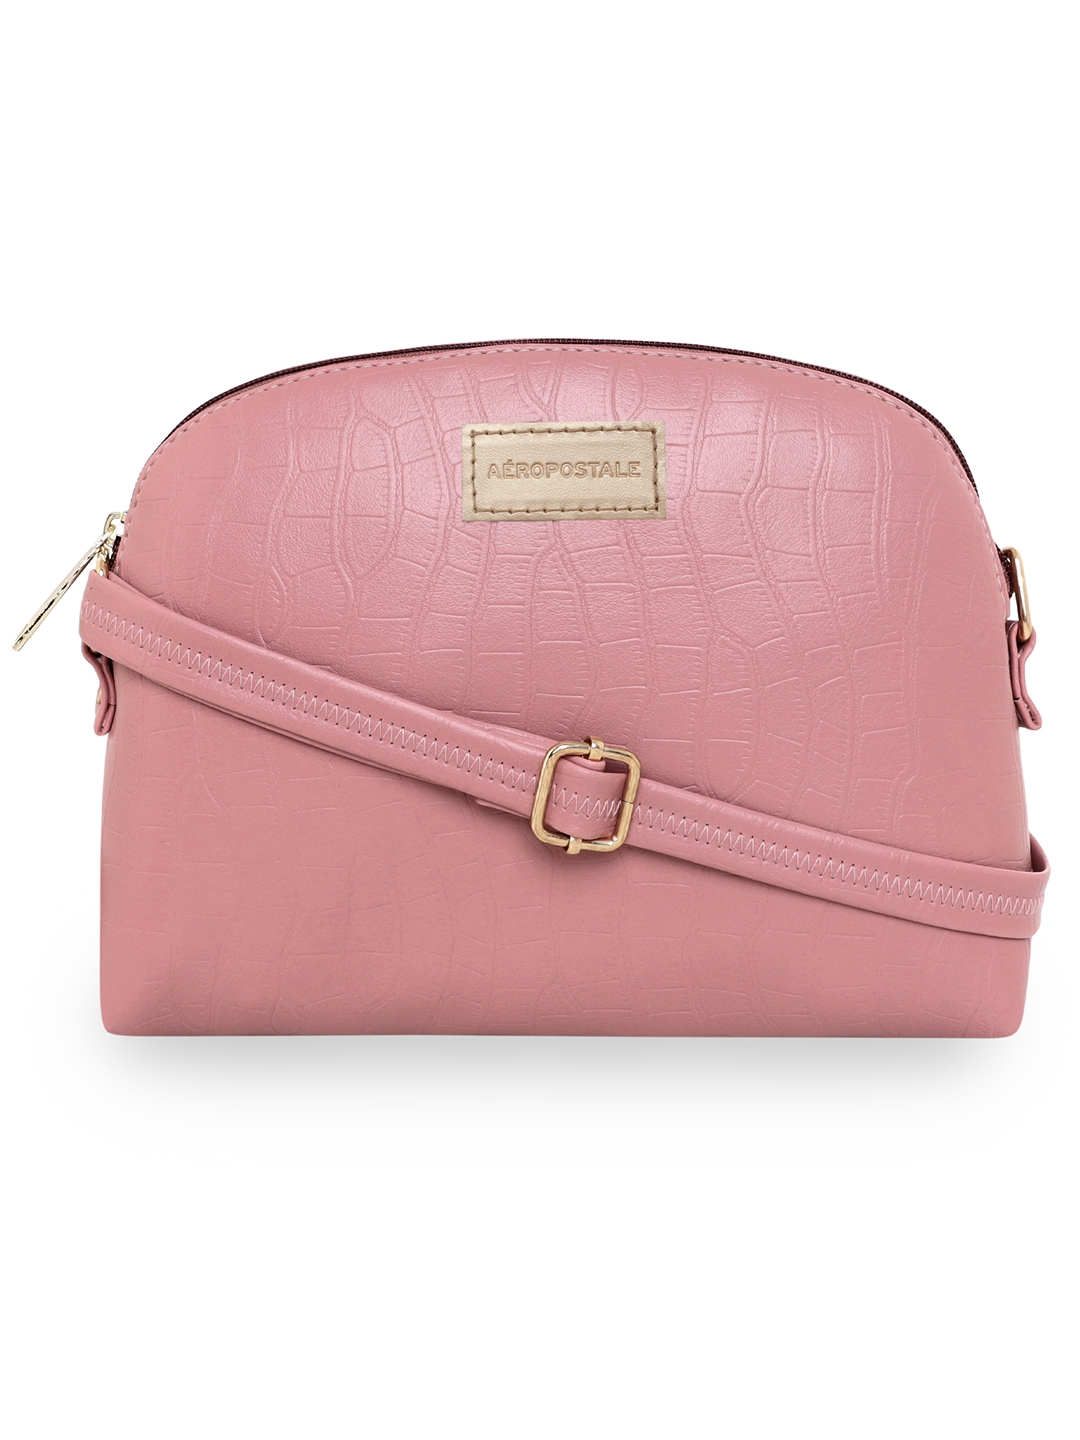 Aeropostale Textured Kylie PU Sling Bag with non-detachable strap (Pink)